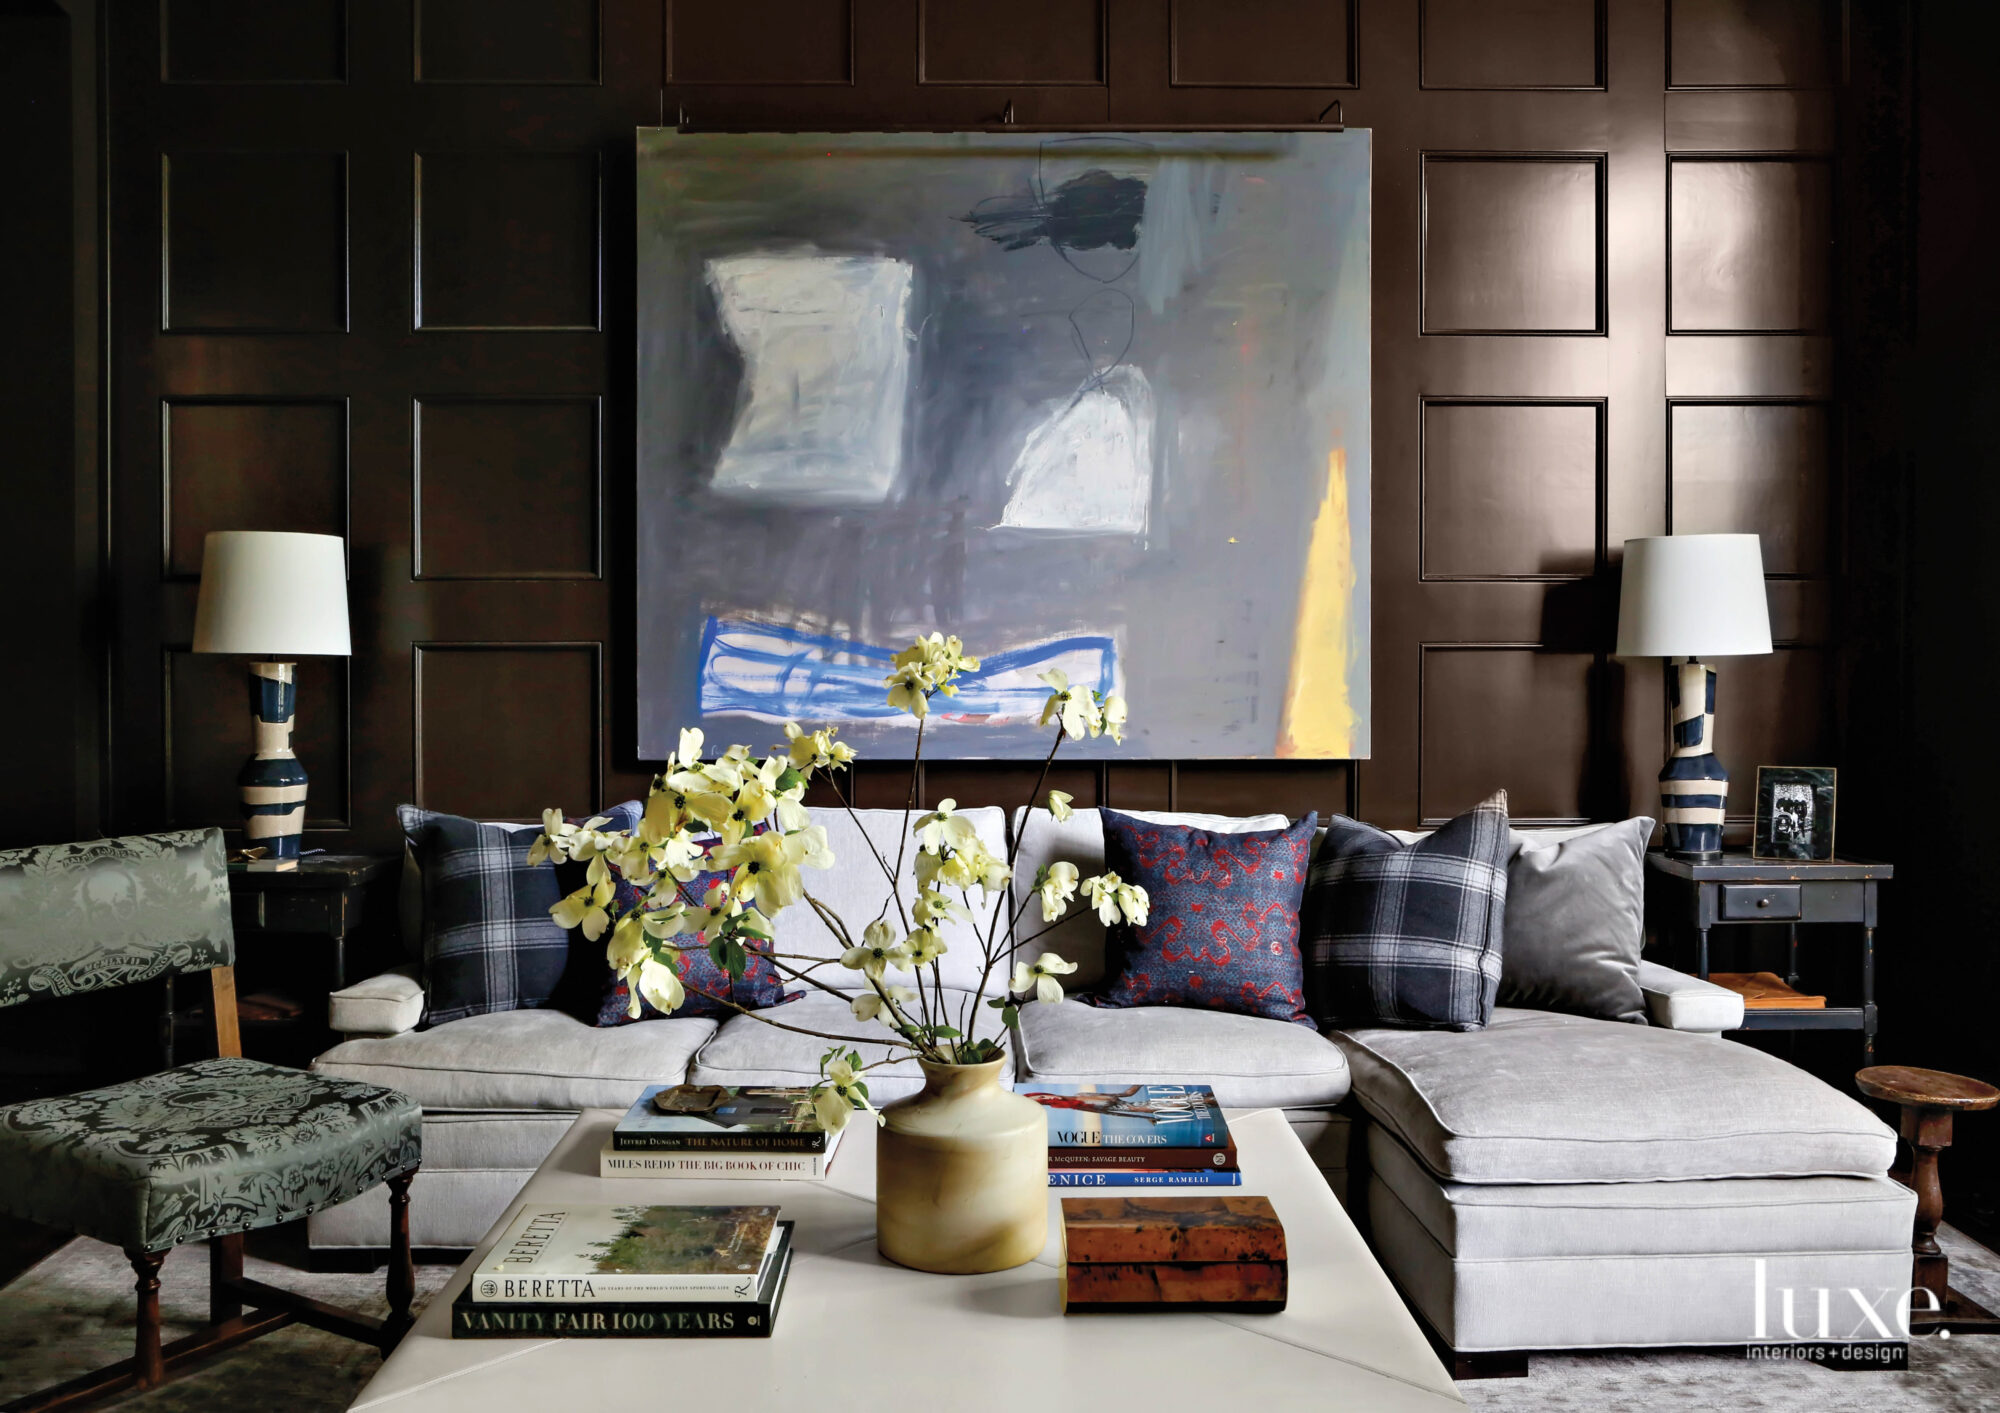 A family room paneled in dark, polished wood with an L-shaped sofa and large abstract artwork